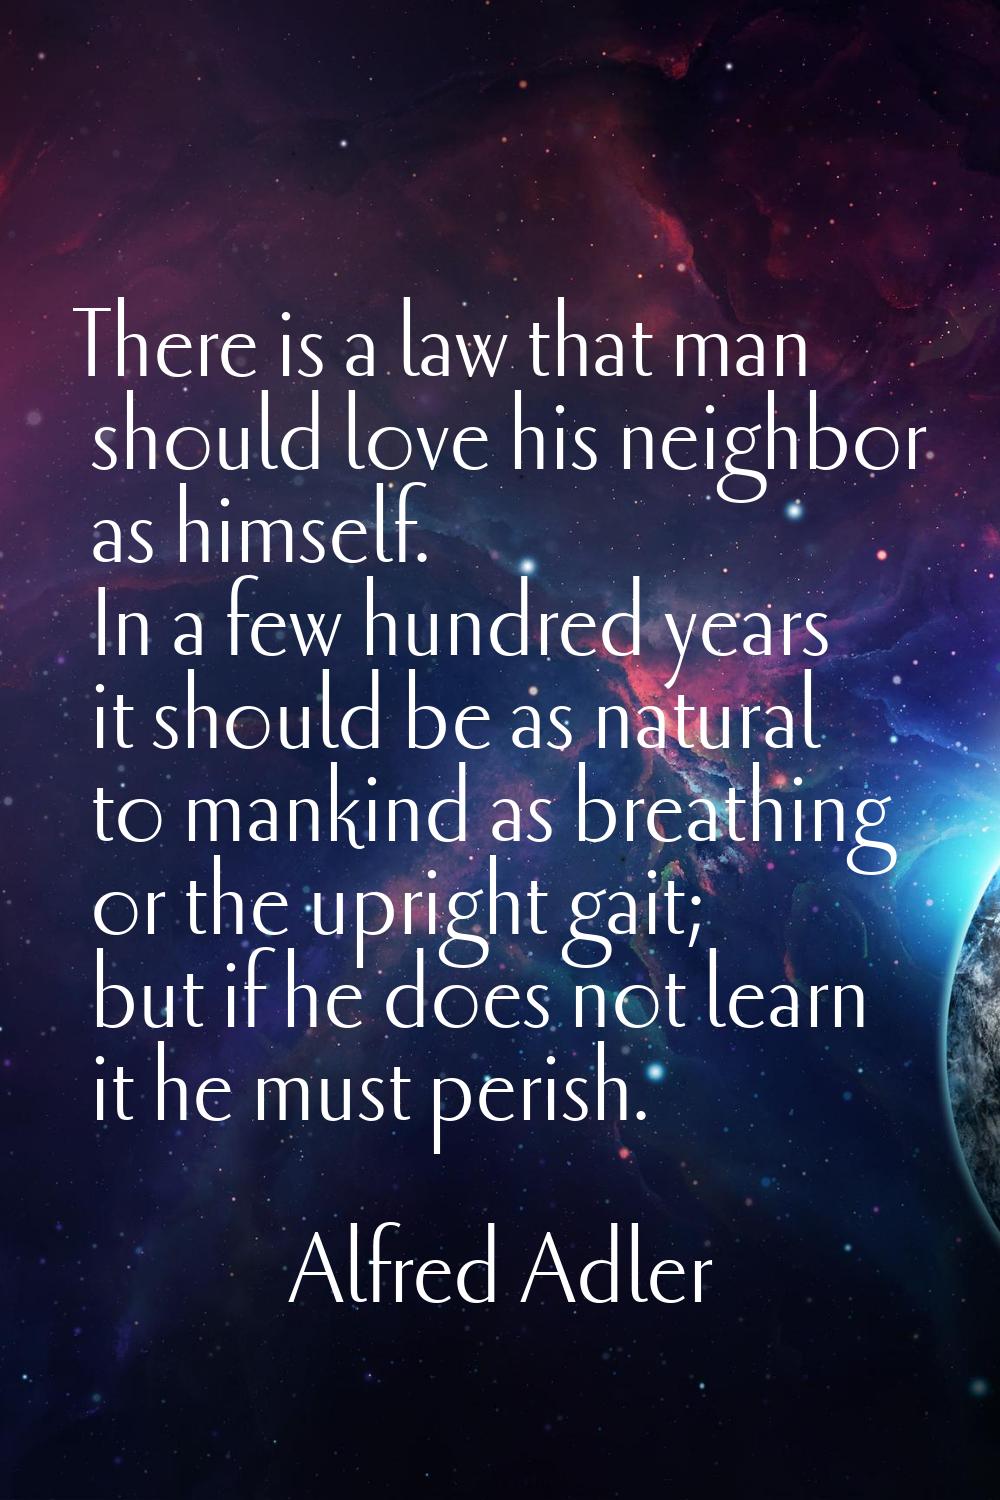 There is a law that man should love his neighbor as himself. In a few hundred years it should be as